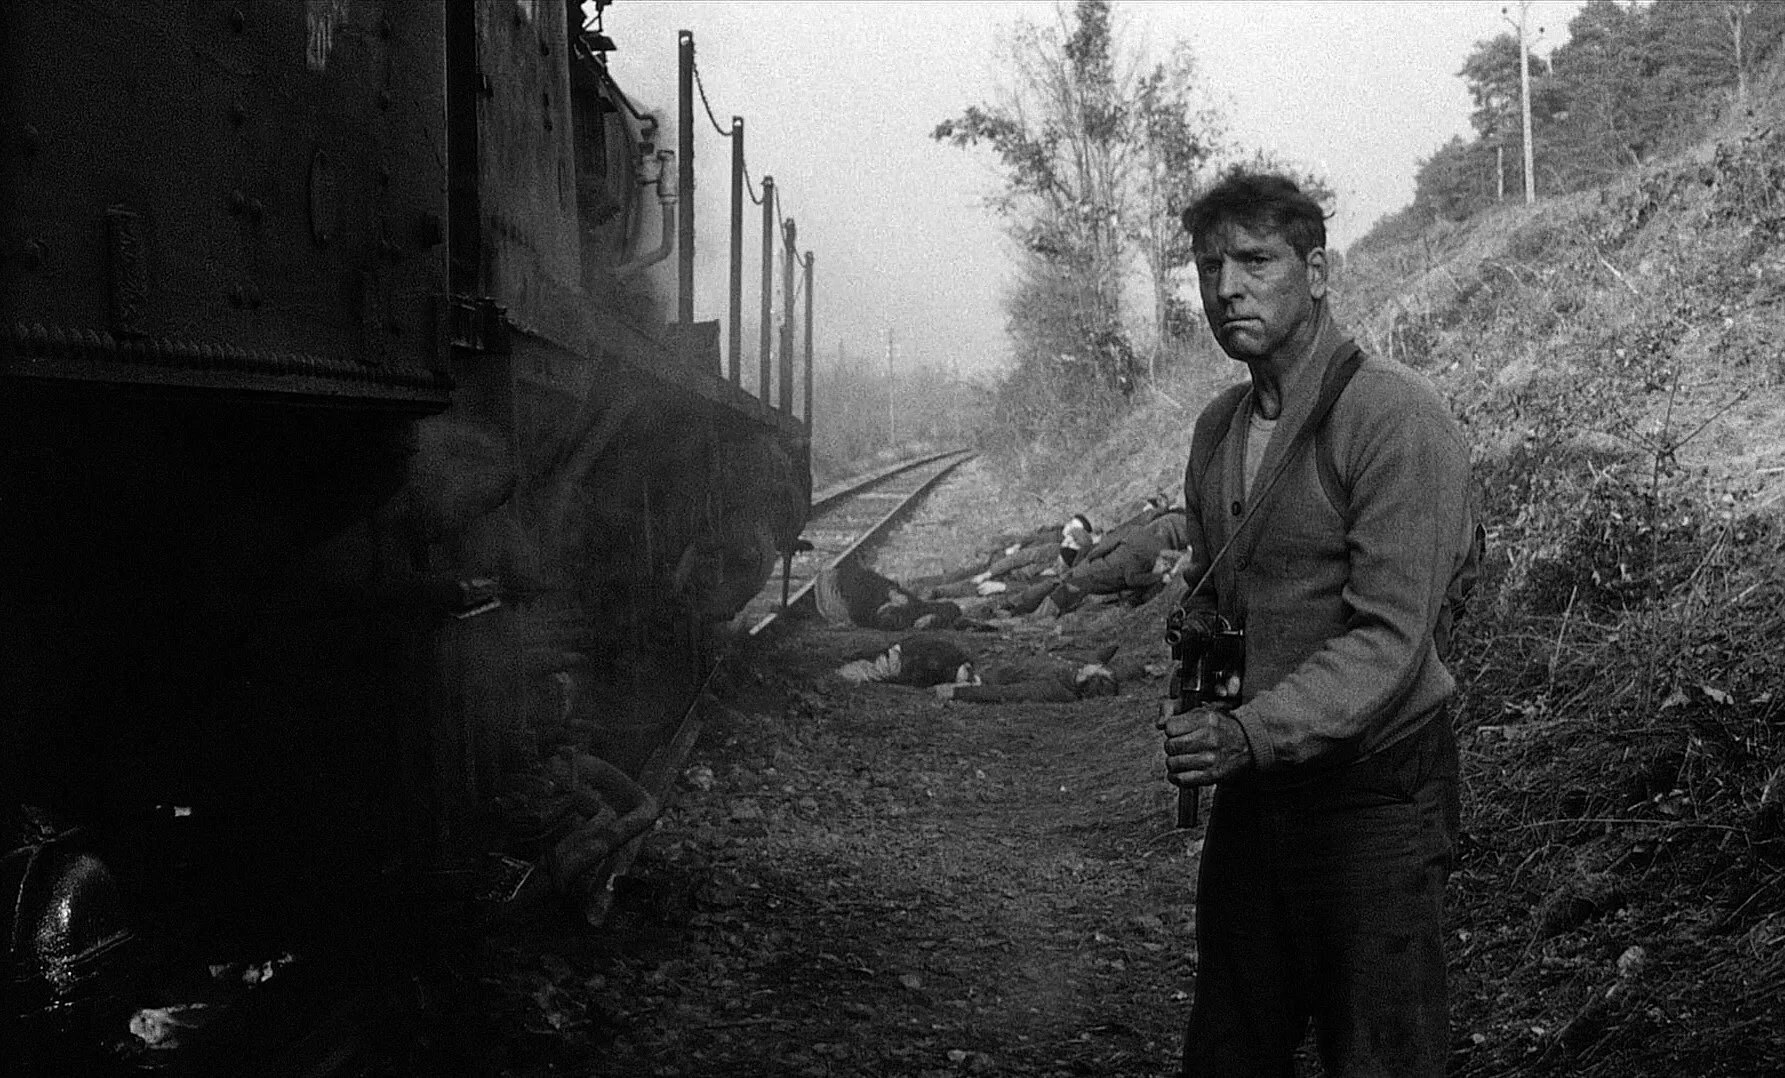 We that he the train. The Train 1964. Джон Франкенхаймер поезд.